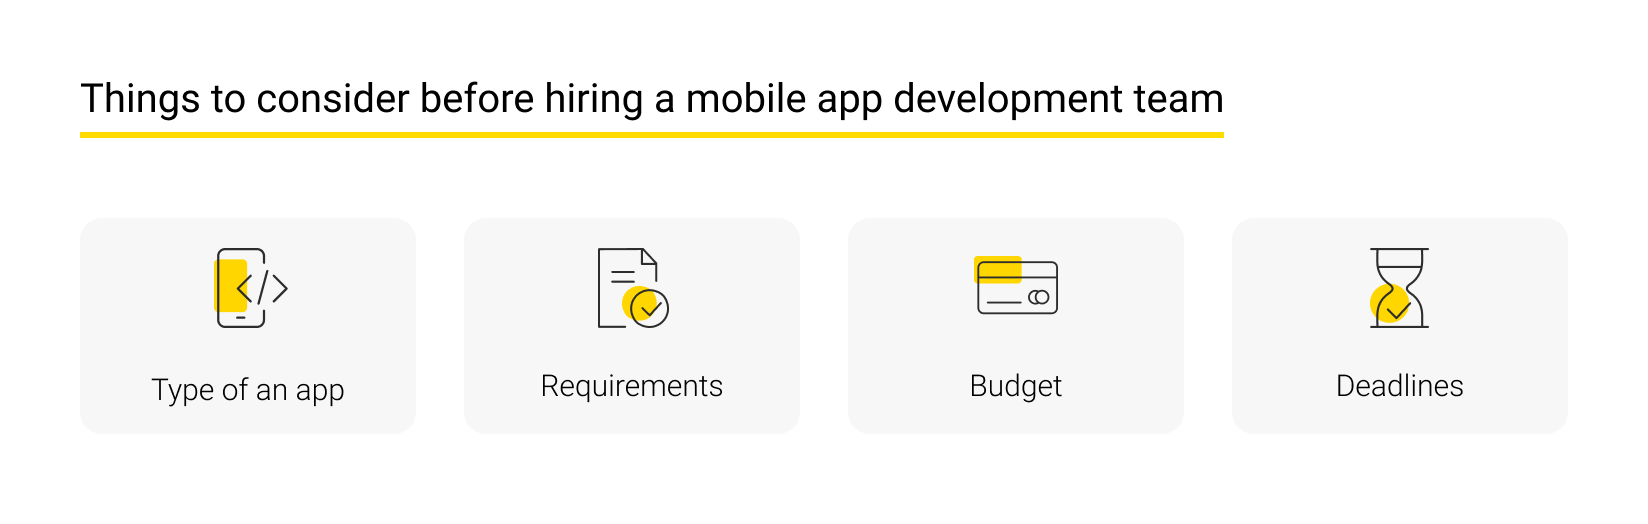 Things to consider before hiring a mobile app development team